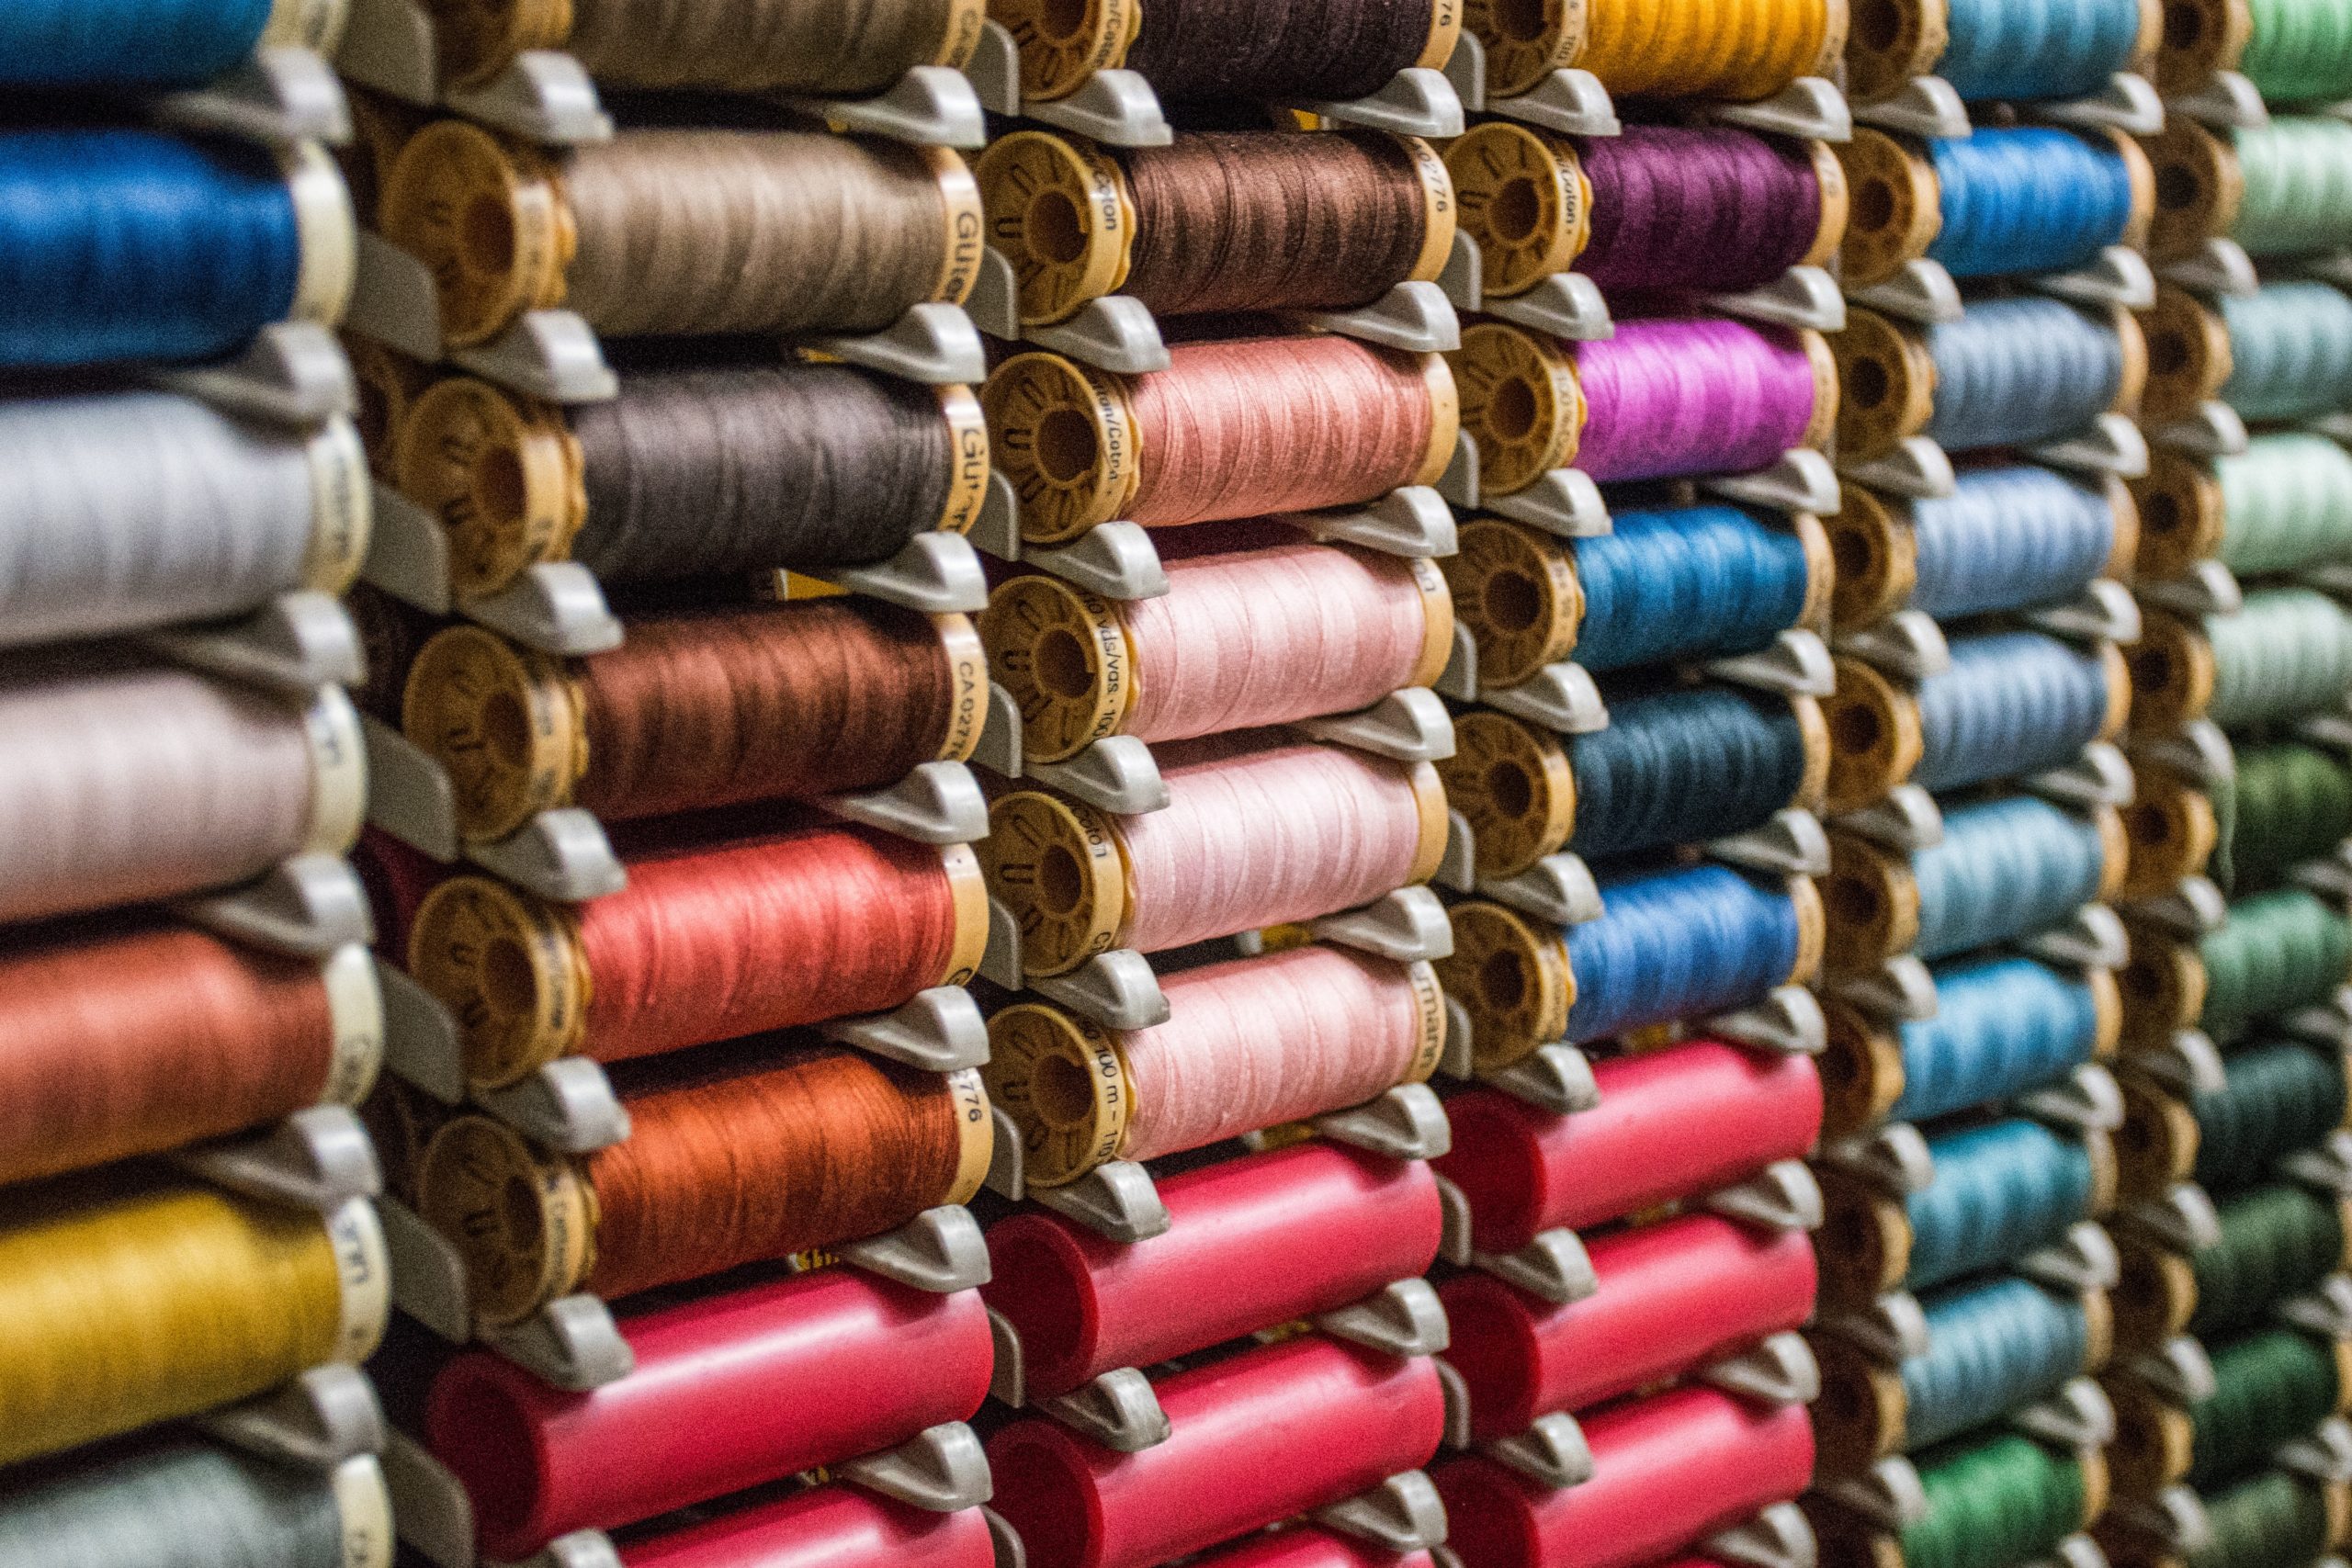 Array of colorful spools of thread